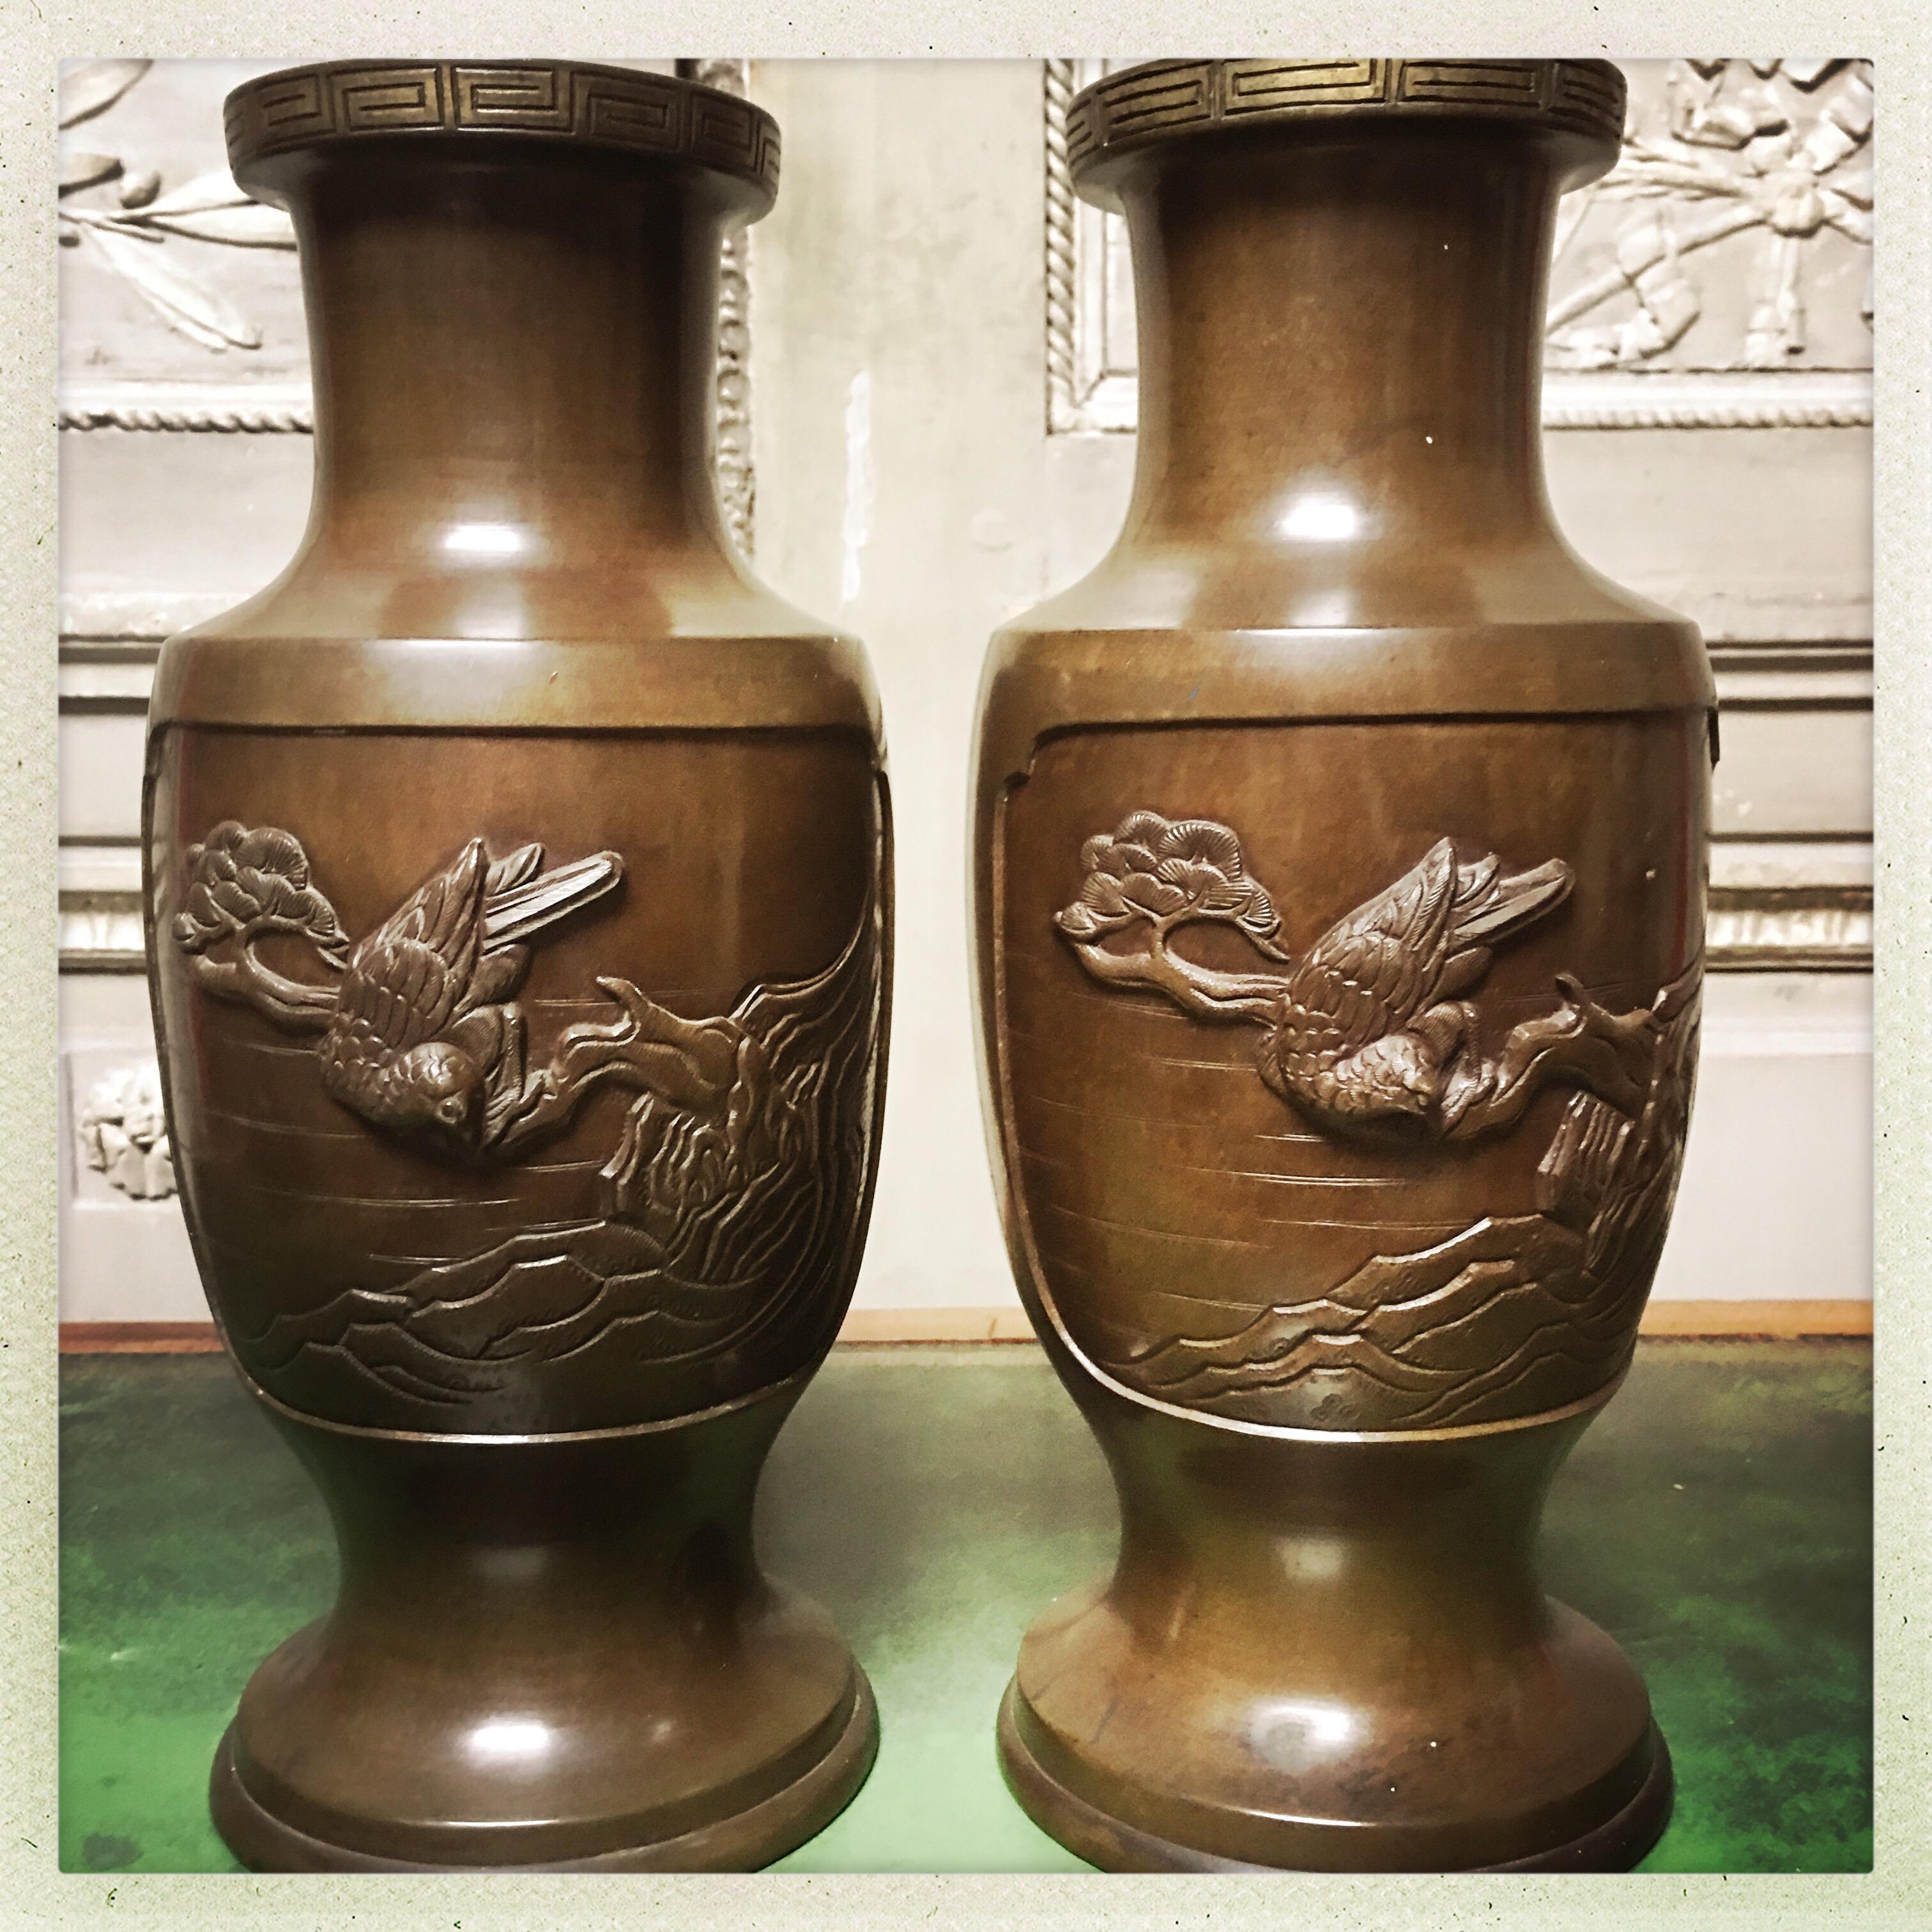 A pair of Japanese bronze vases depicting scenes with different birds.
These would make a wonderful pair of lamps.